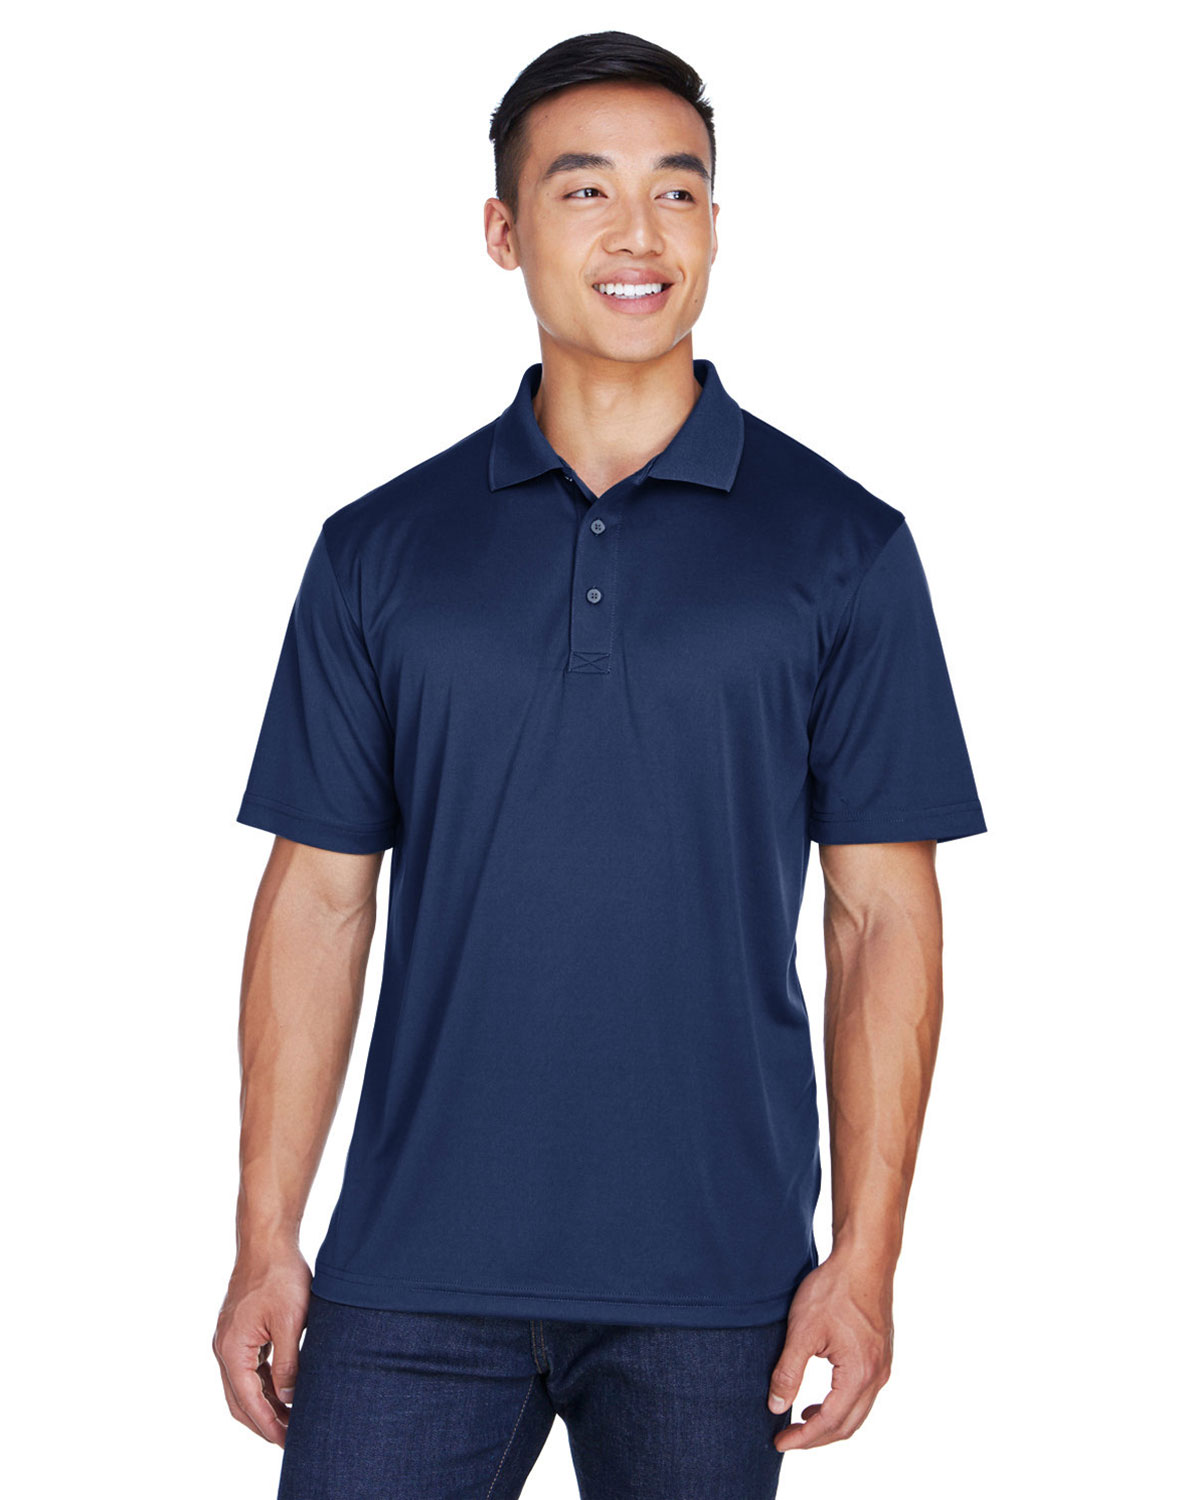 UltraClub 8405T Men Tall Cool & Dry Sport Polo at Apparelstation